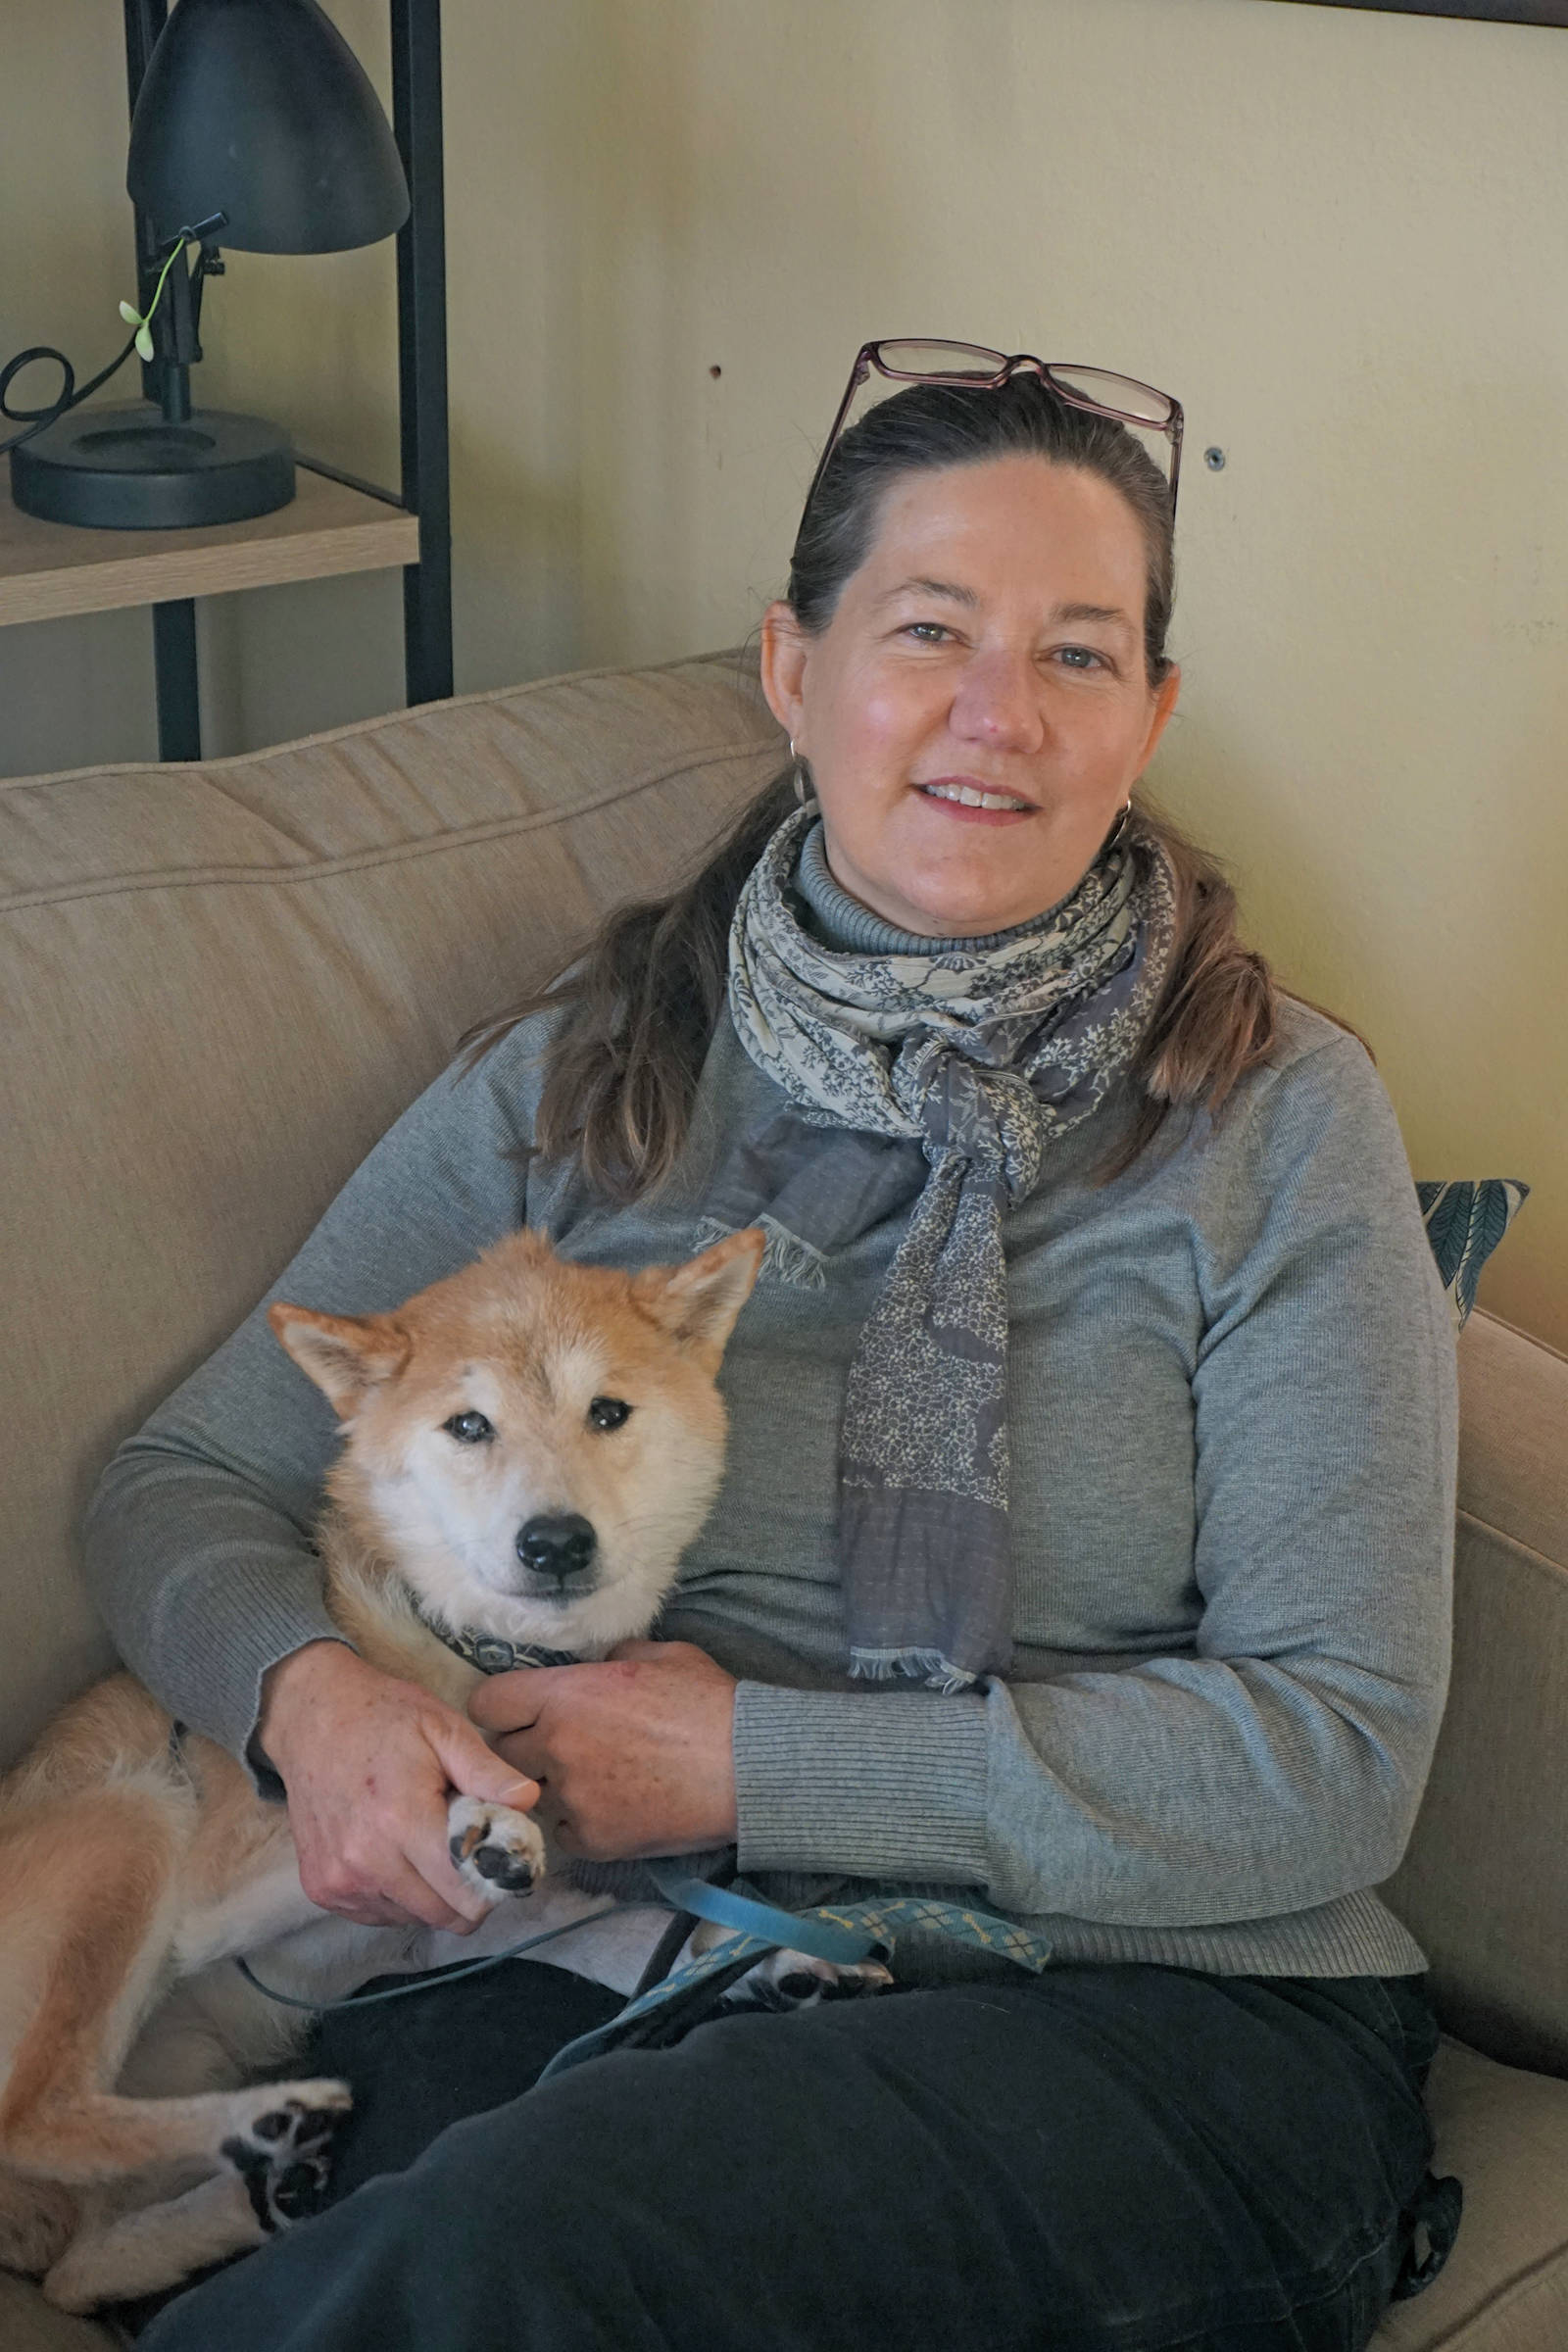 New Pratt Museum Executive Director Jennifer Gibbins poses with her dog, Bo, at her new home on Nov. 21, 2019, in Homer, Alaska. (Photo by Michael Armstrong/Homer News)